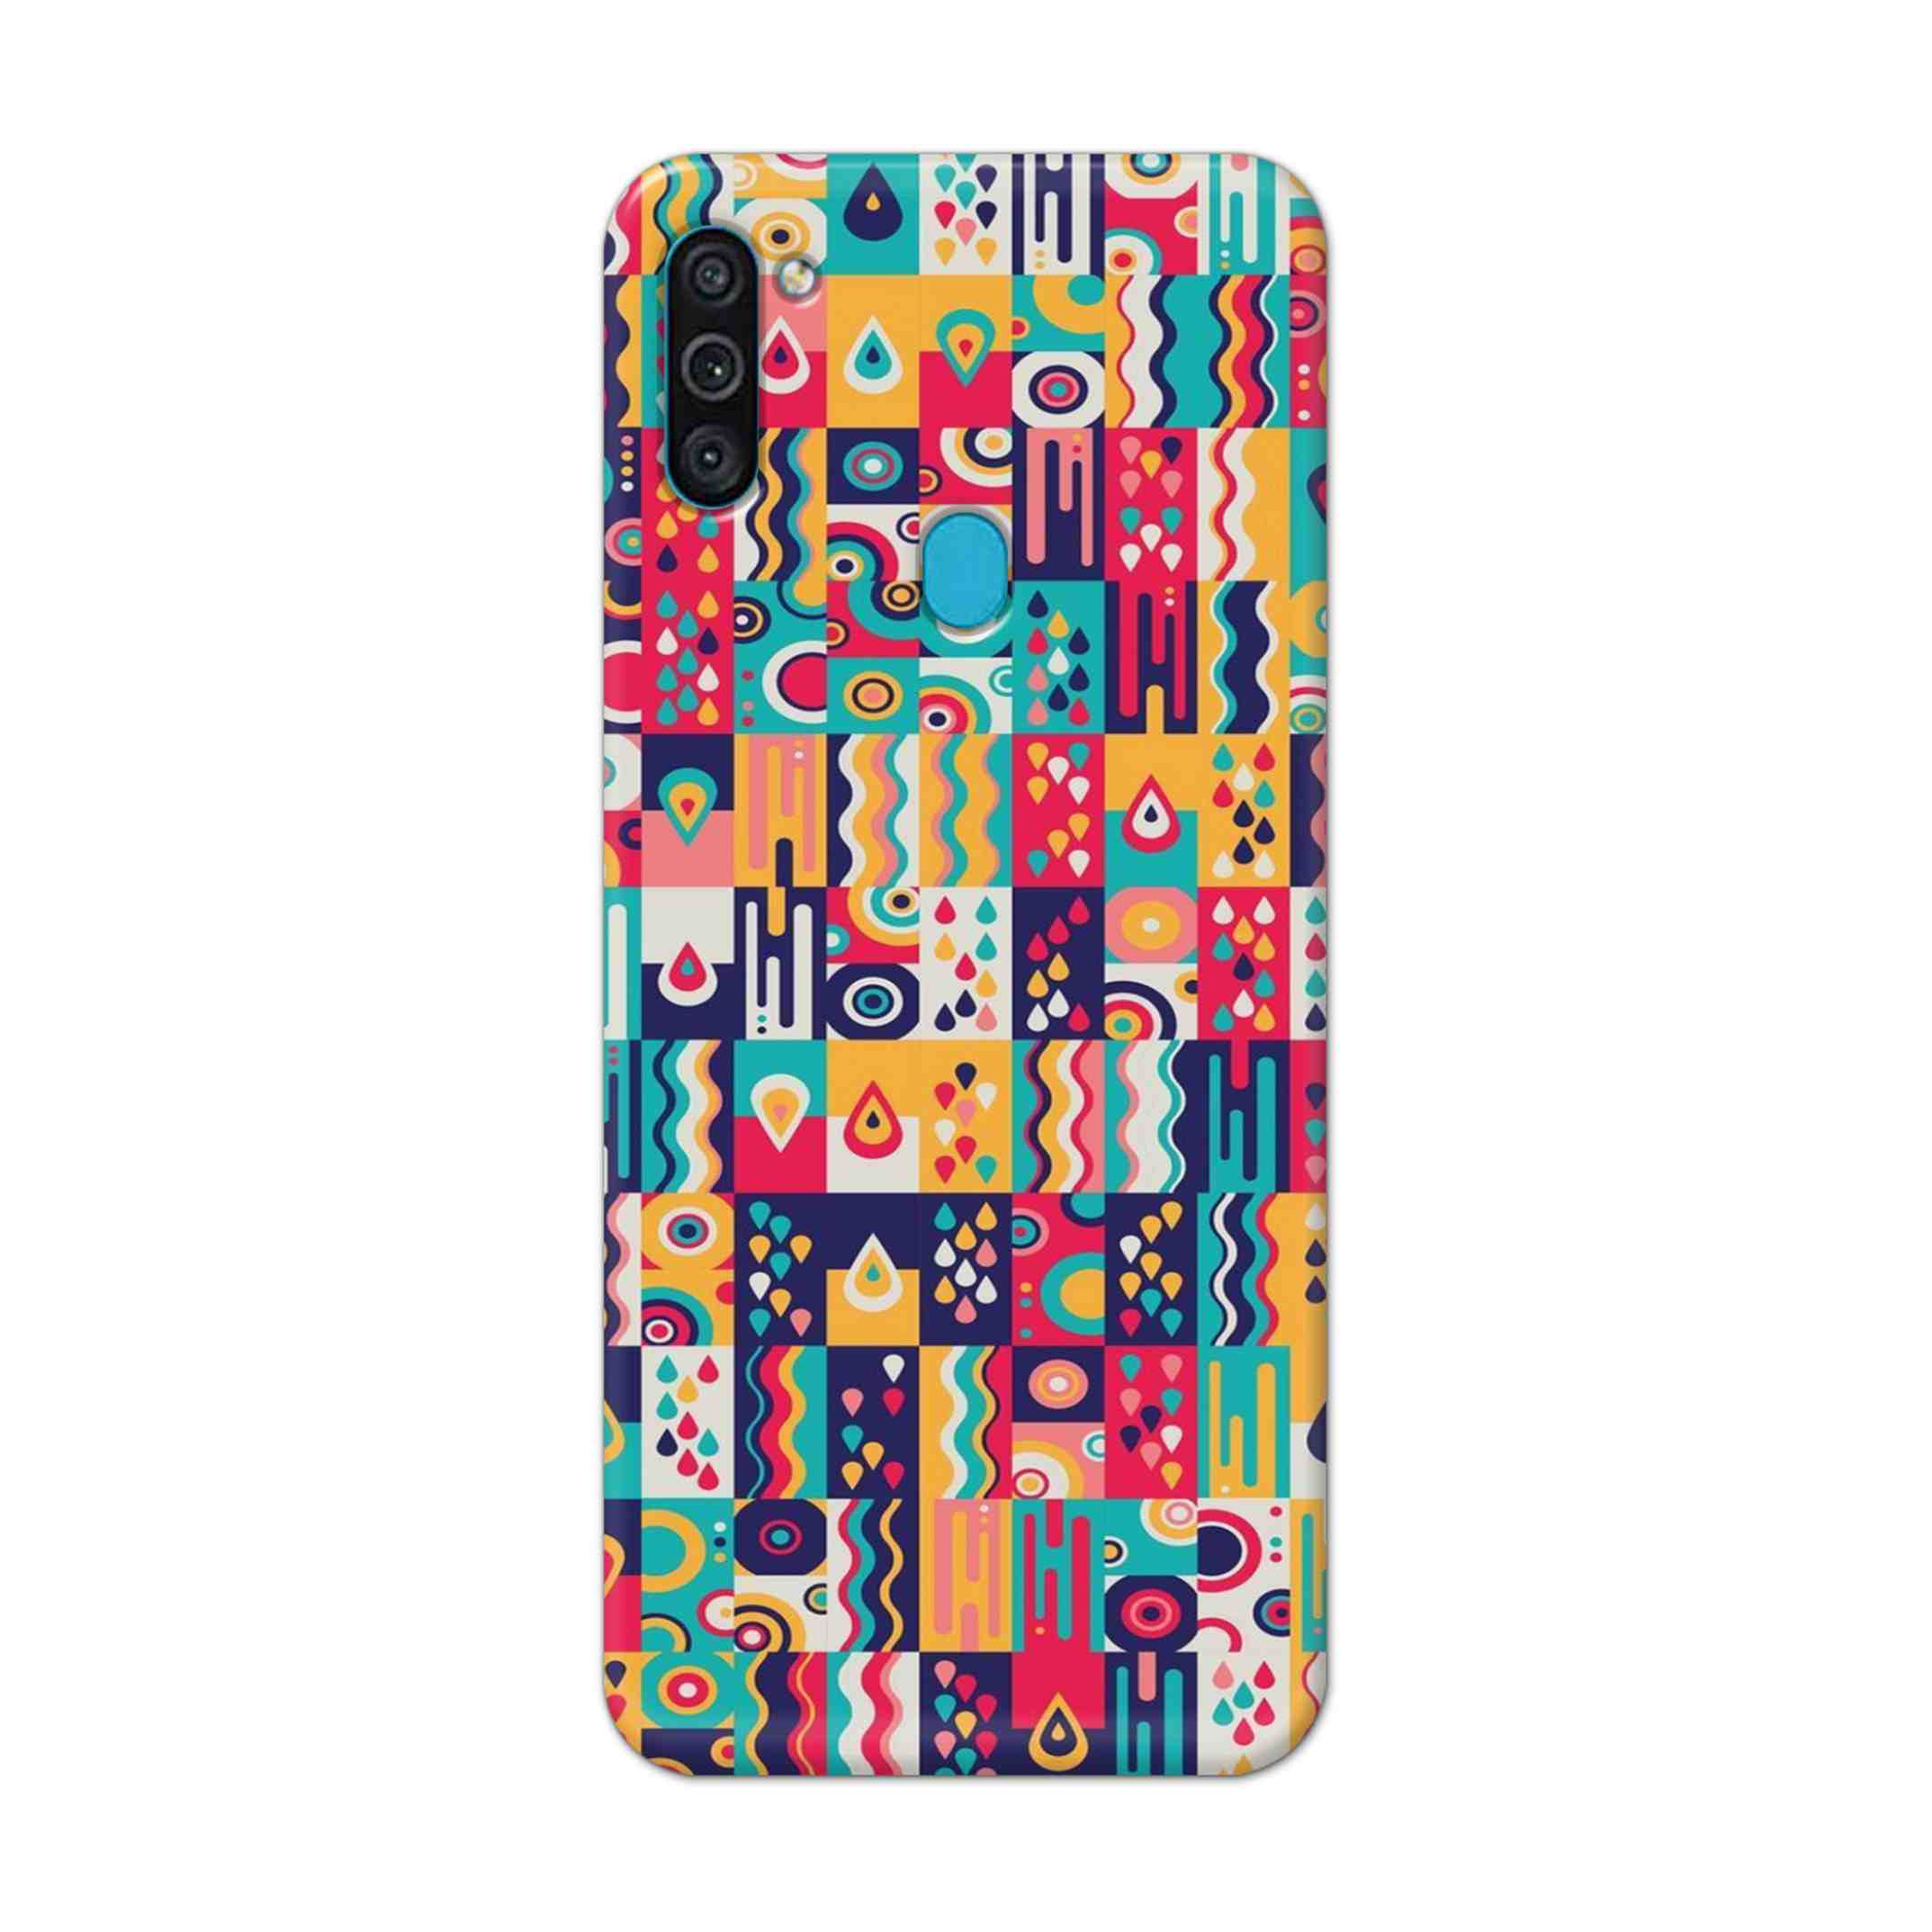 Buy Art Hard Back Mobile Phone Case Cover For Samsung Galaxy M11 Online